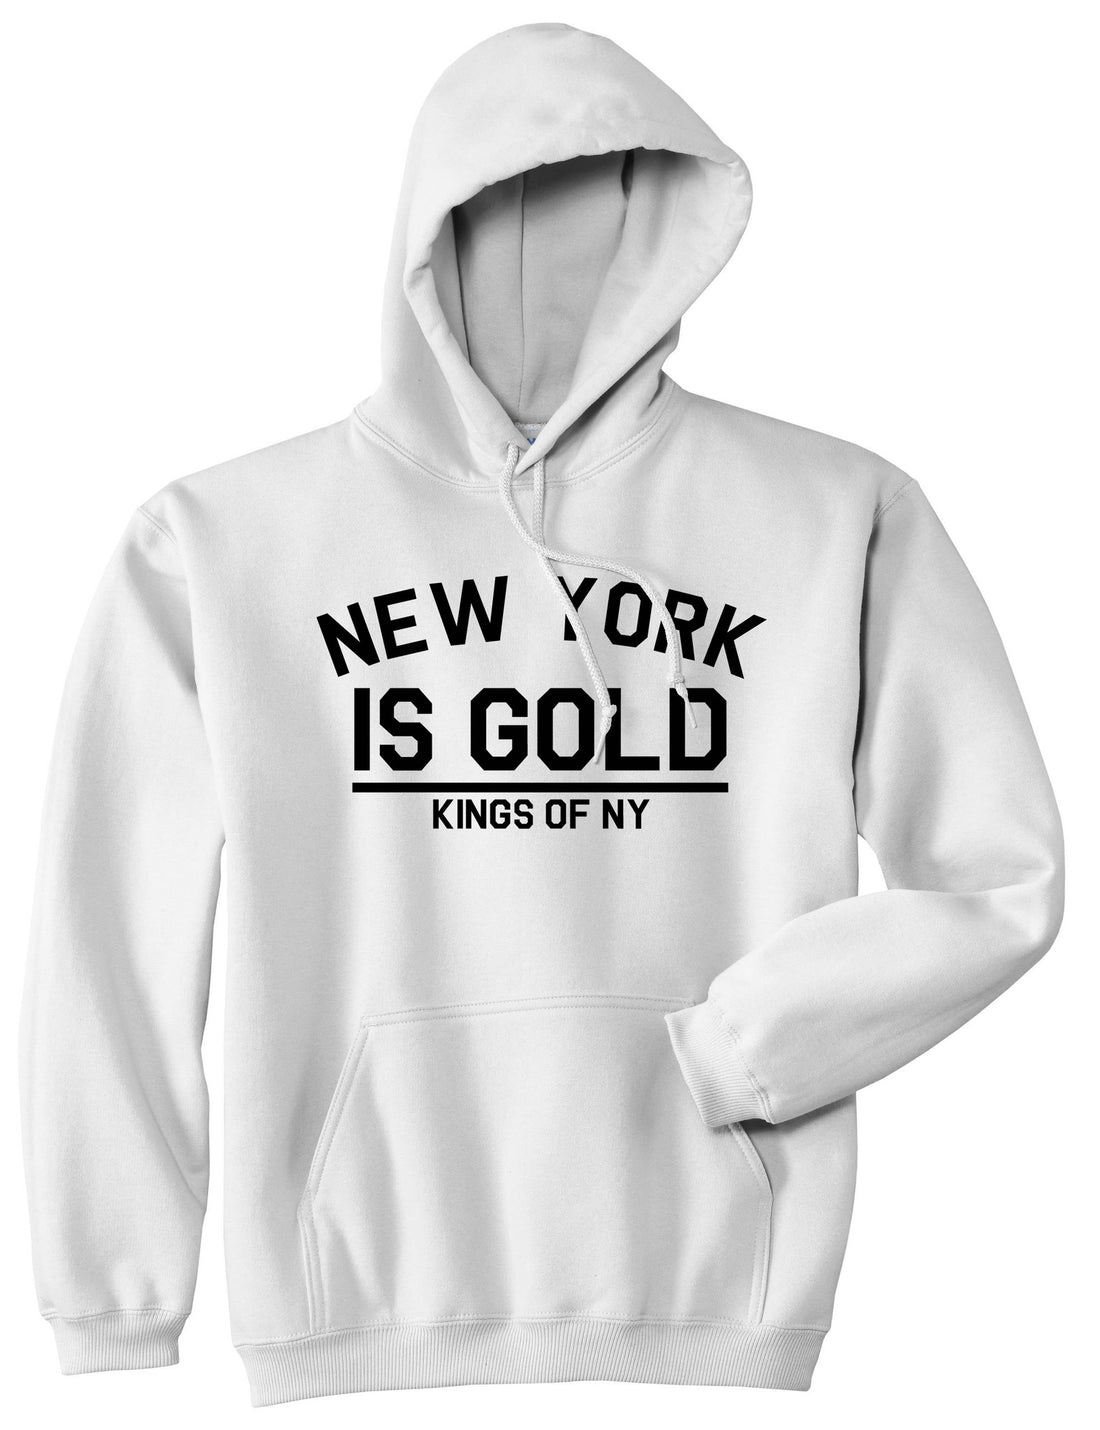 New York Is Gold Pullover Hoodie Hoody in White by Kings Of NY